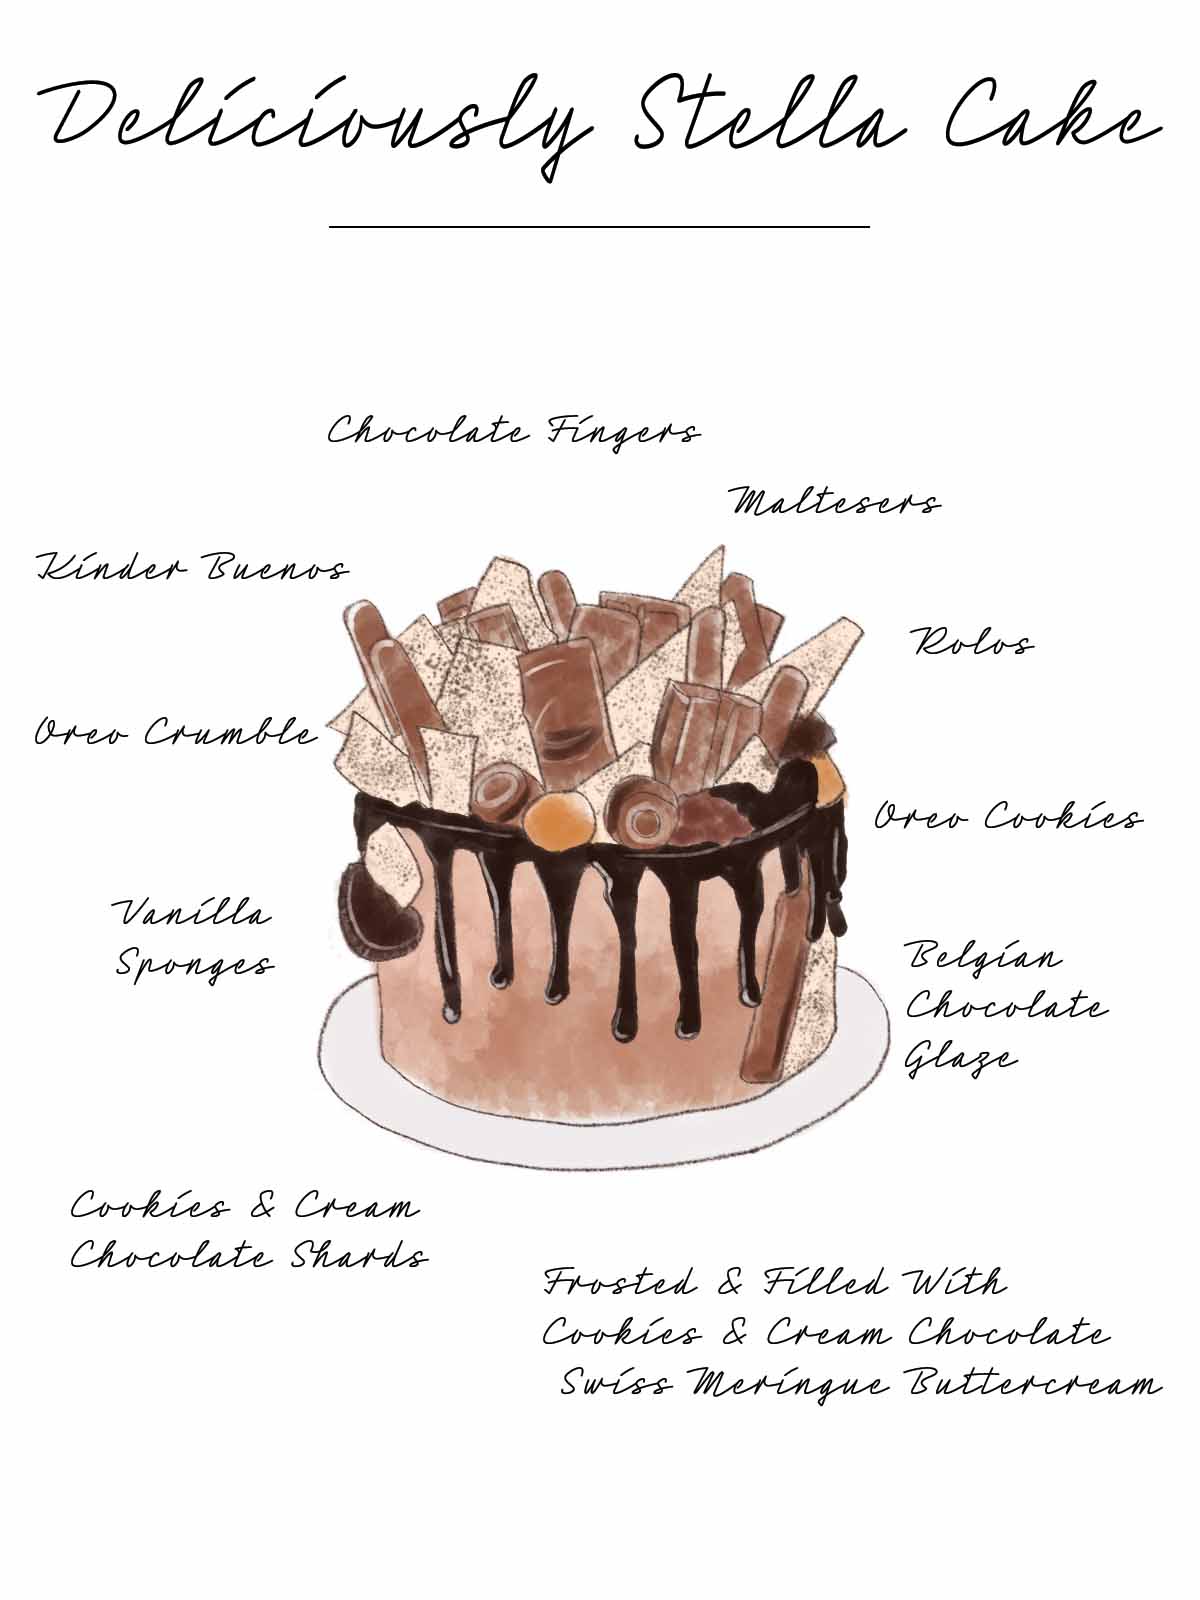 Deliciously Stella Chocolate Cake Infographic 